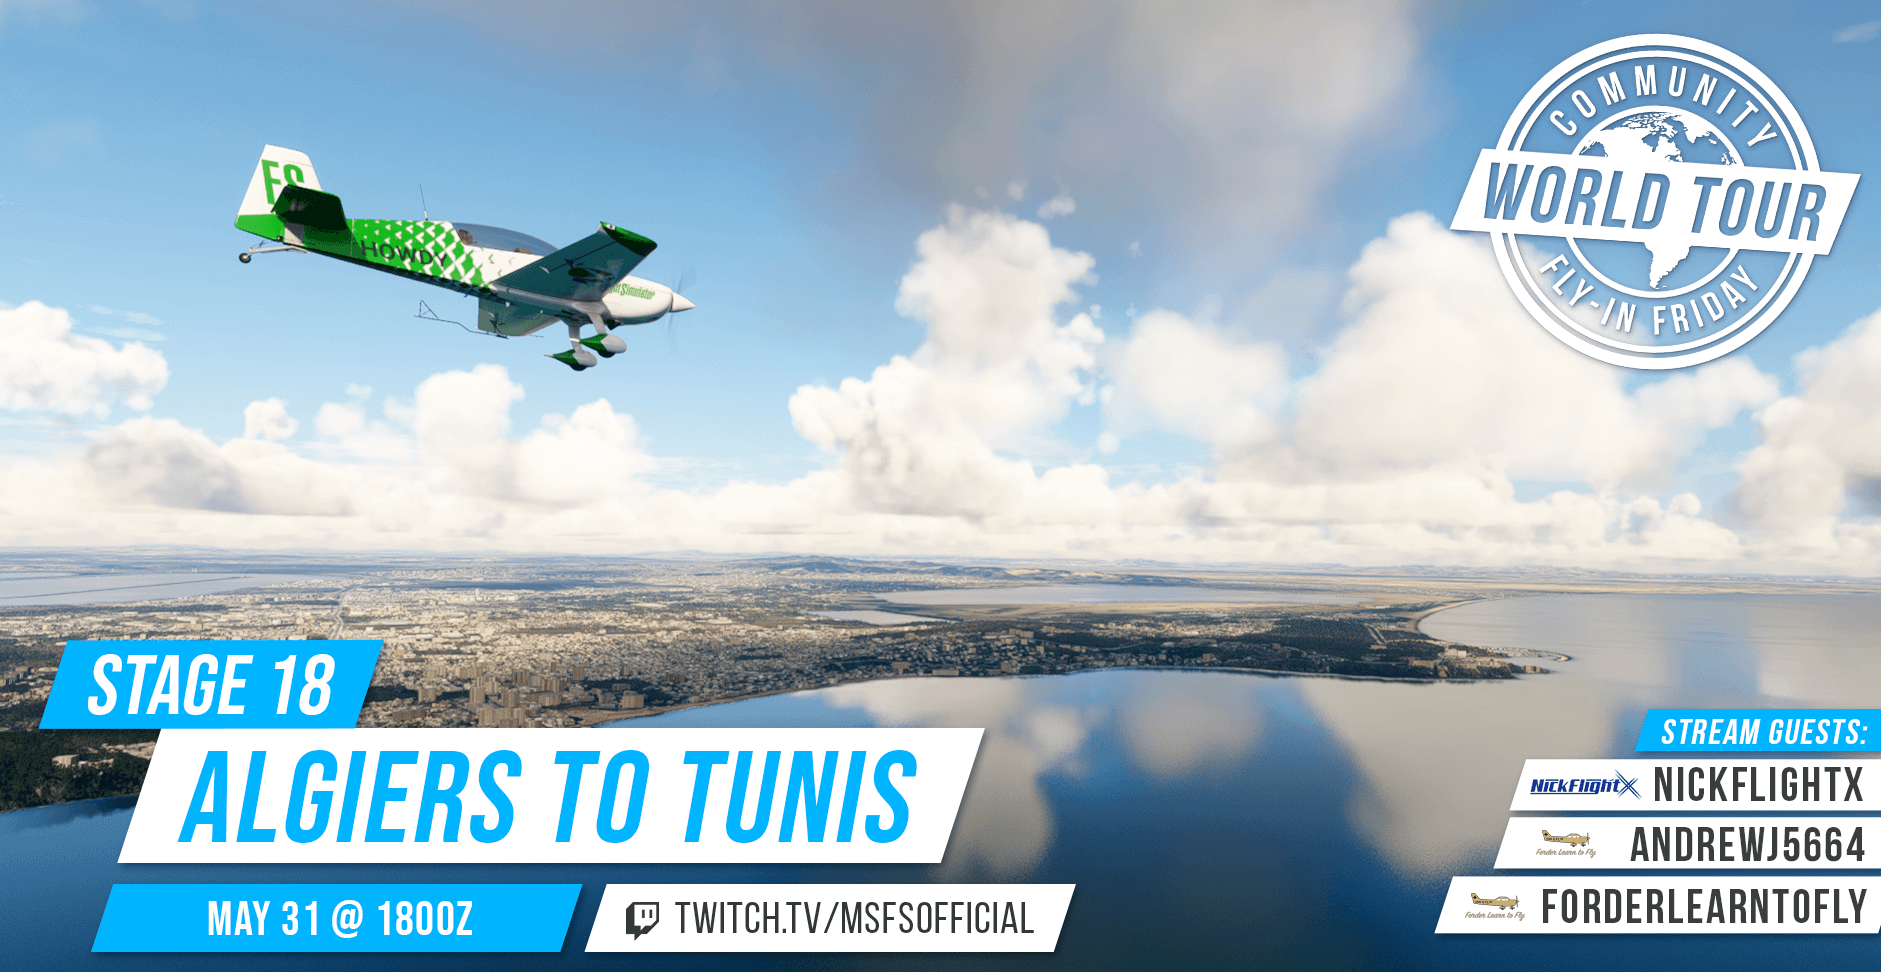 Community Fly-In Friday: World Tour Algiers to Tunis. May 31st at 1800 UTC. twitch.tv/msfsofficial